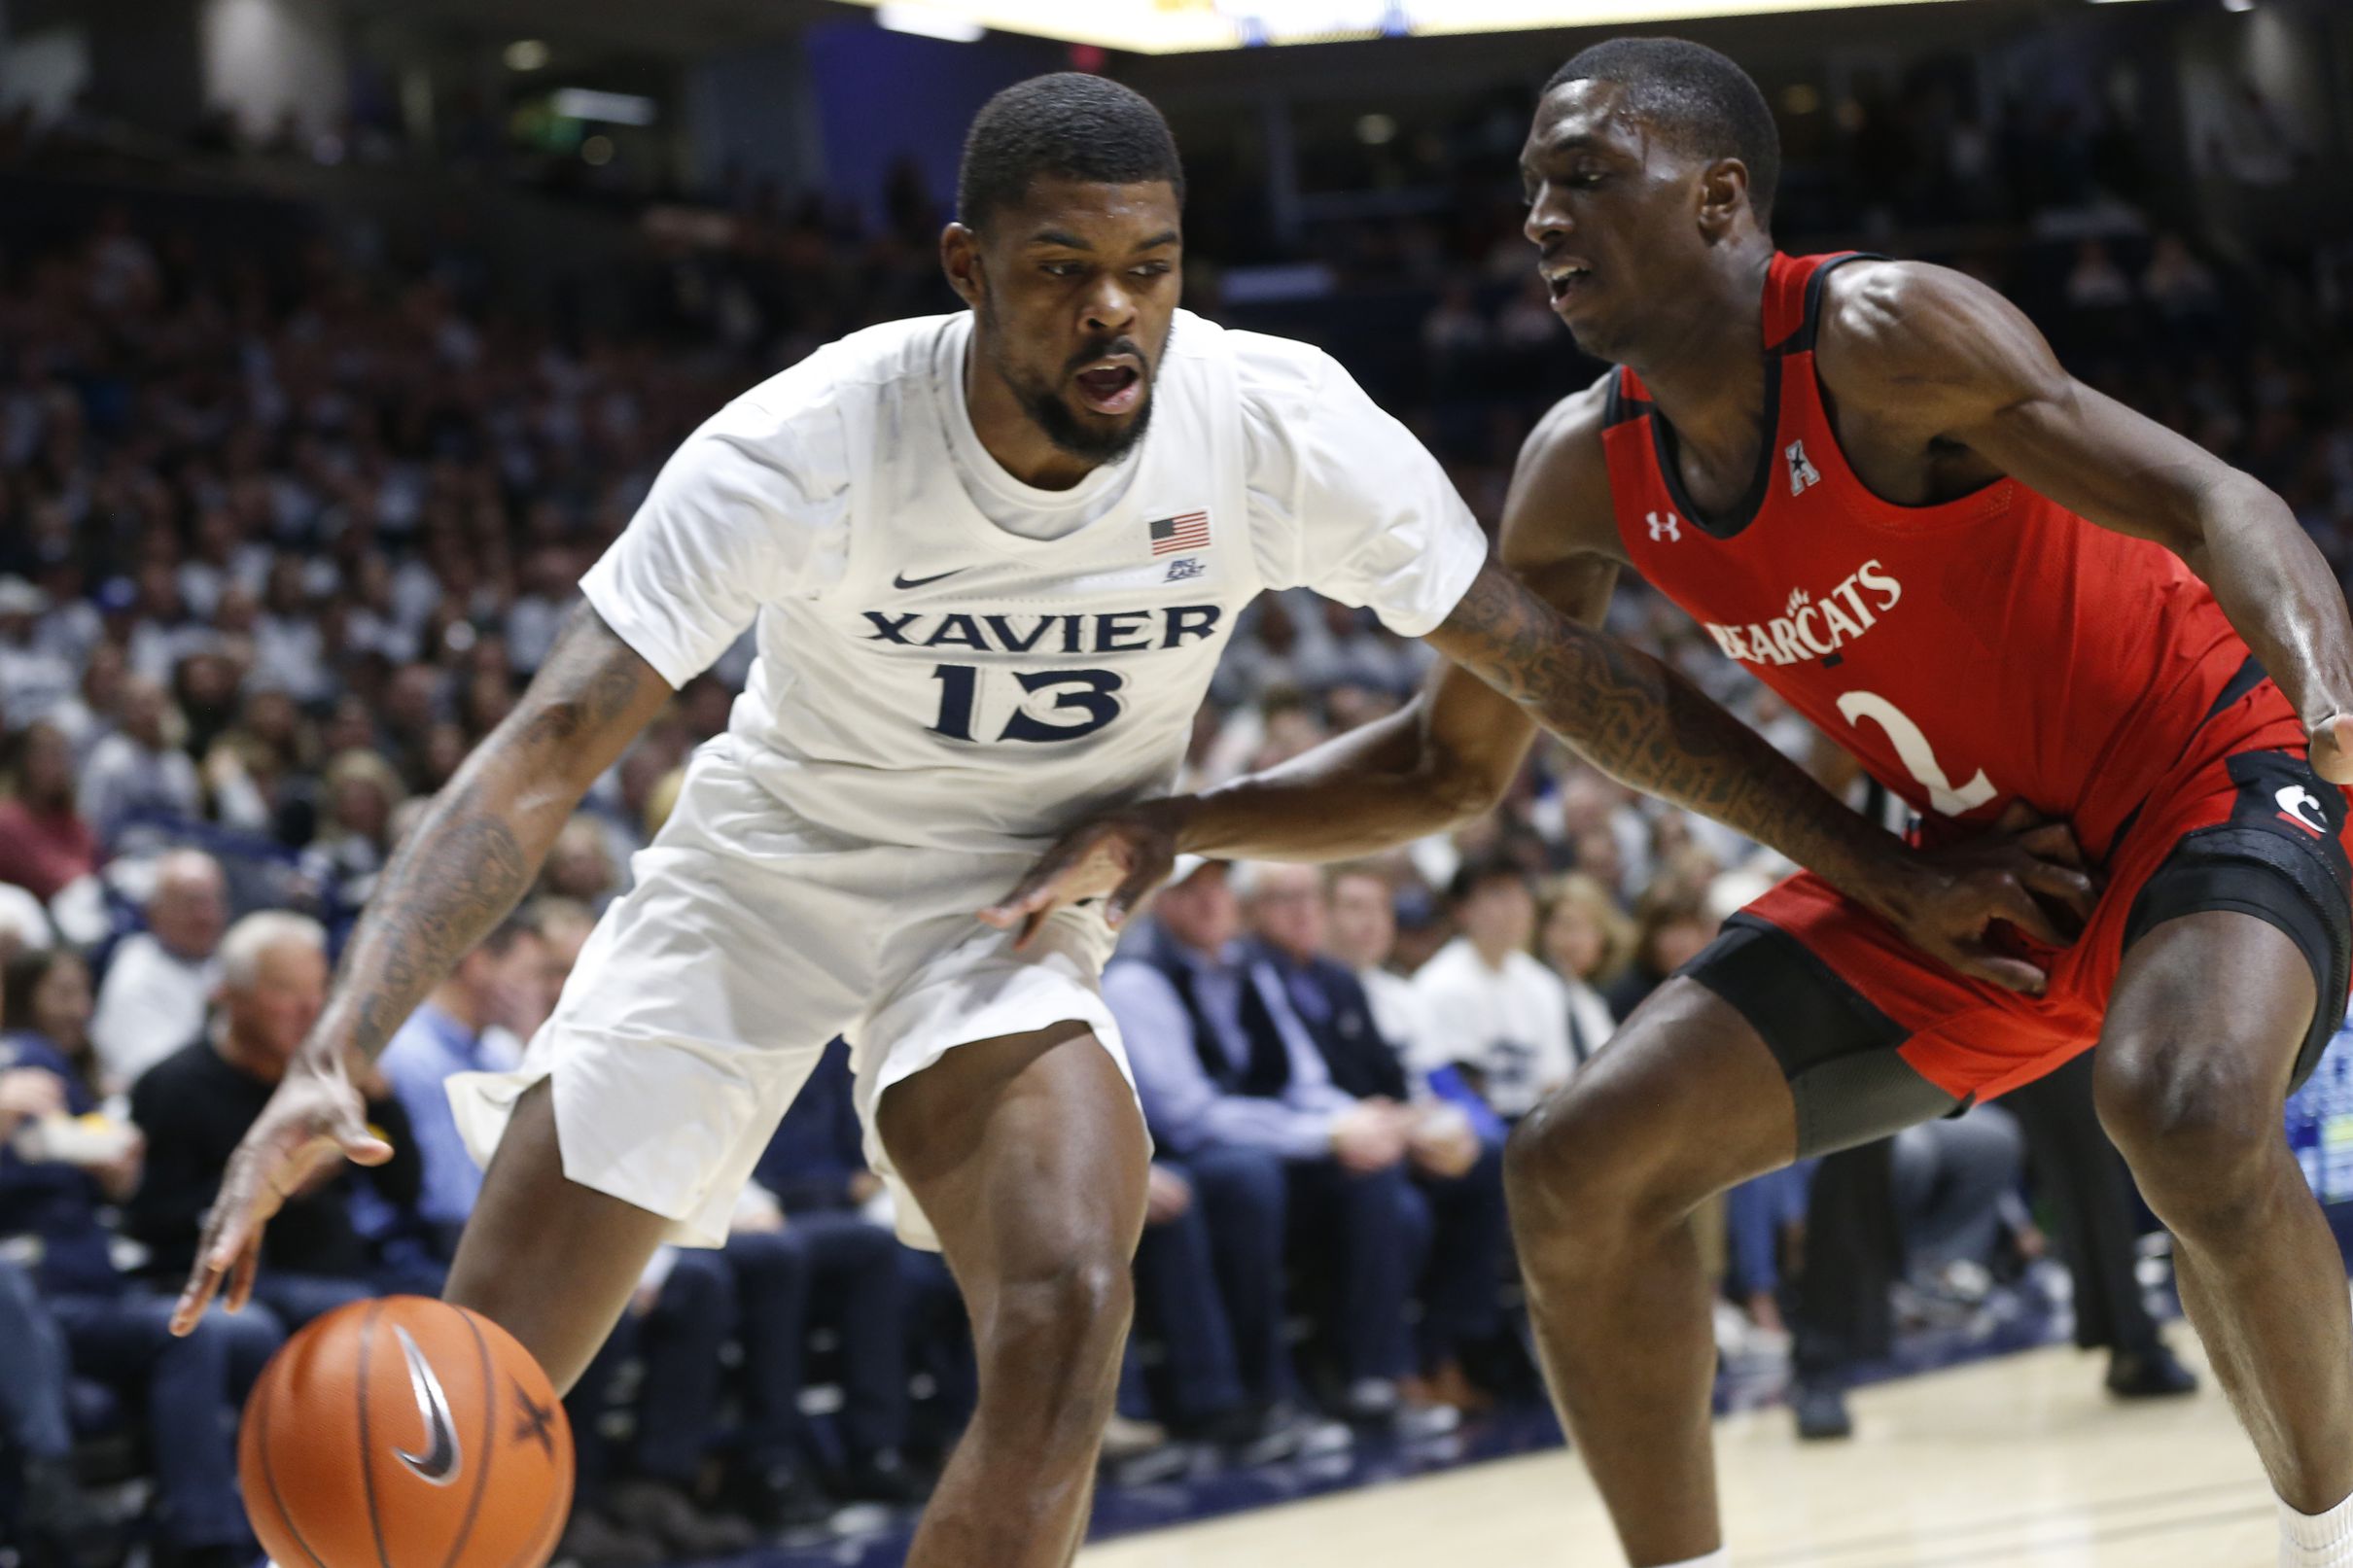 Xavier beats UC to win another Crosstown Shootout at the Cintas Center